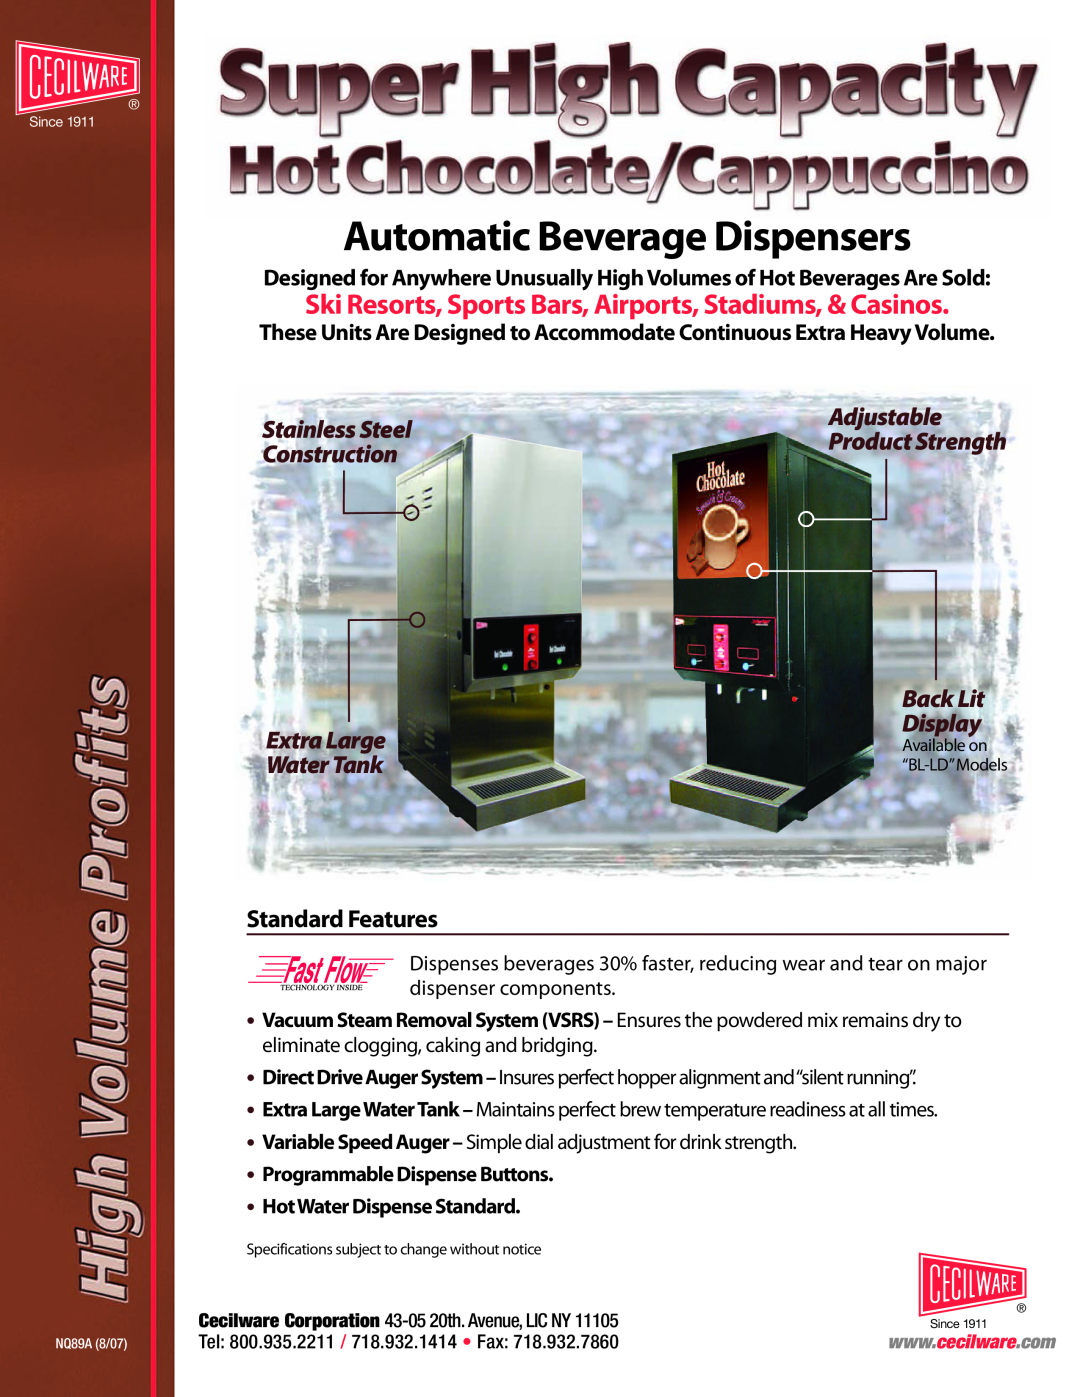 Cecilware BL-LD specifications Standard Features, Automatic Beverage Dispensers, Stainless Steel, Adjustable, Construction 